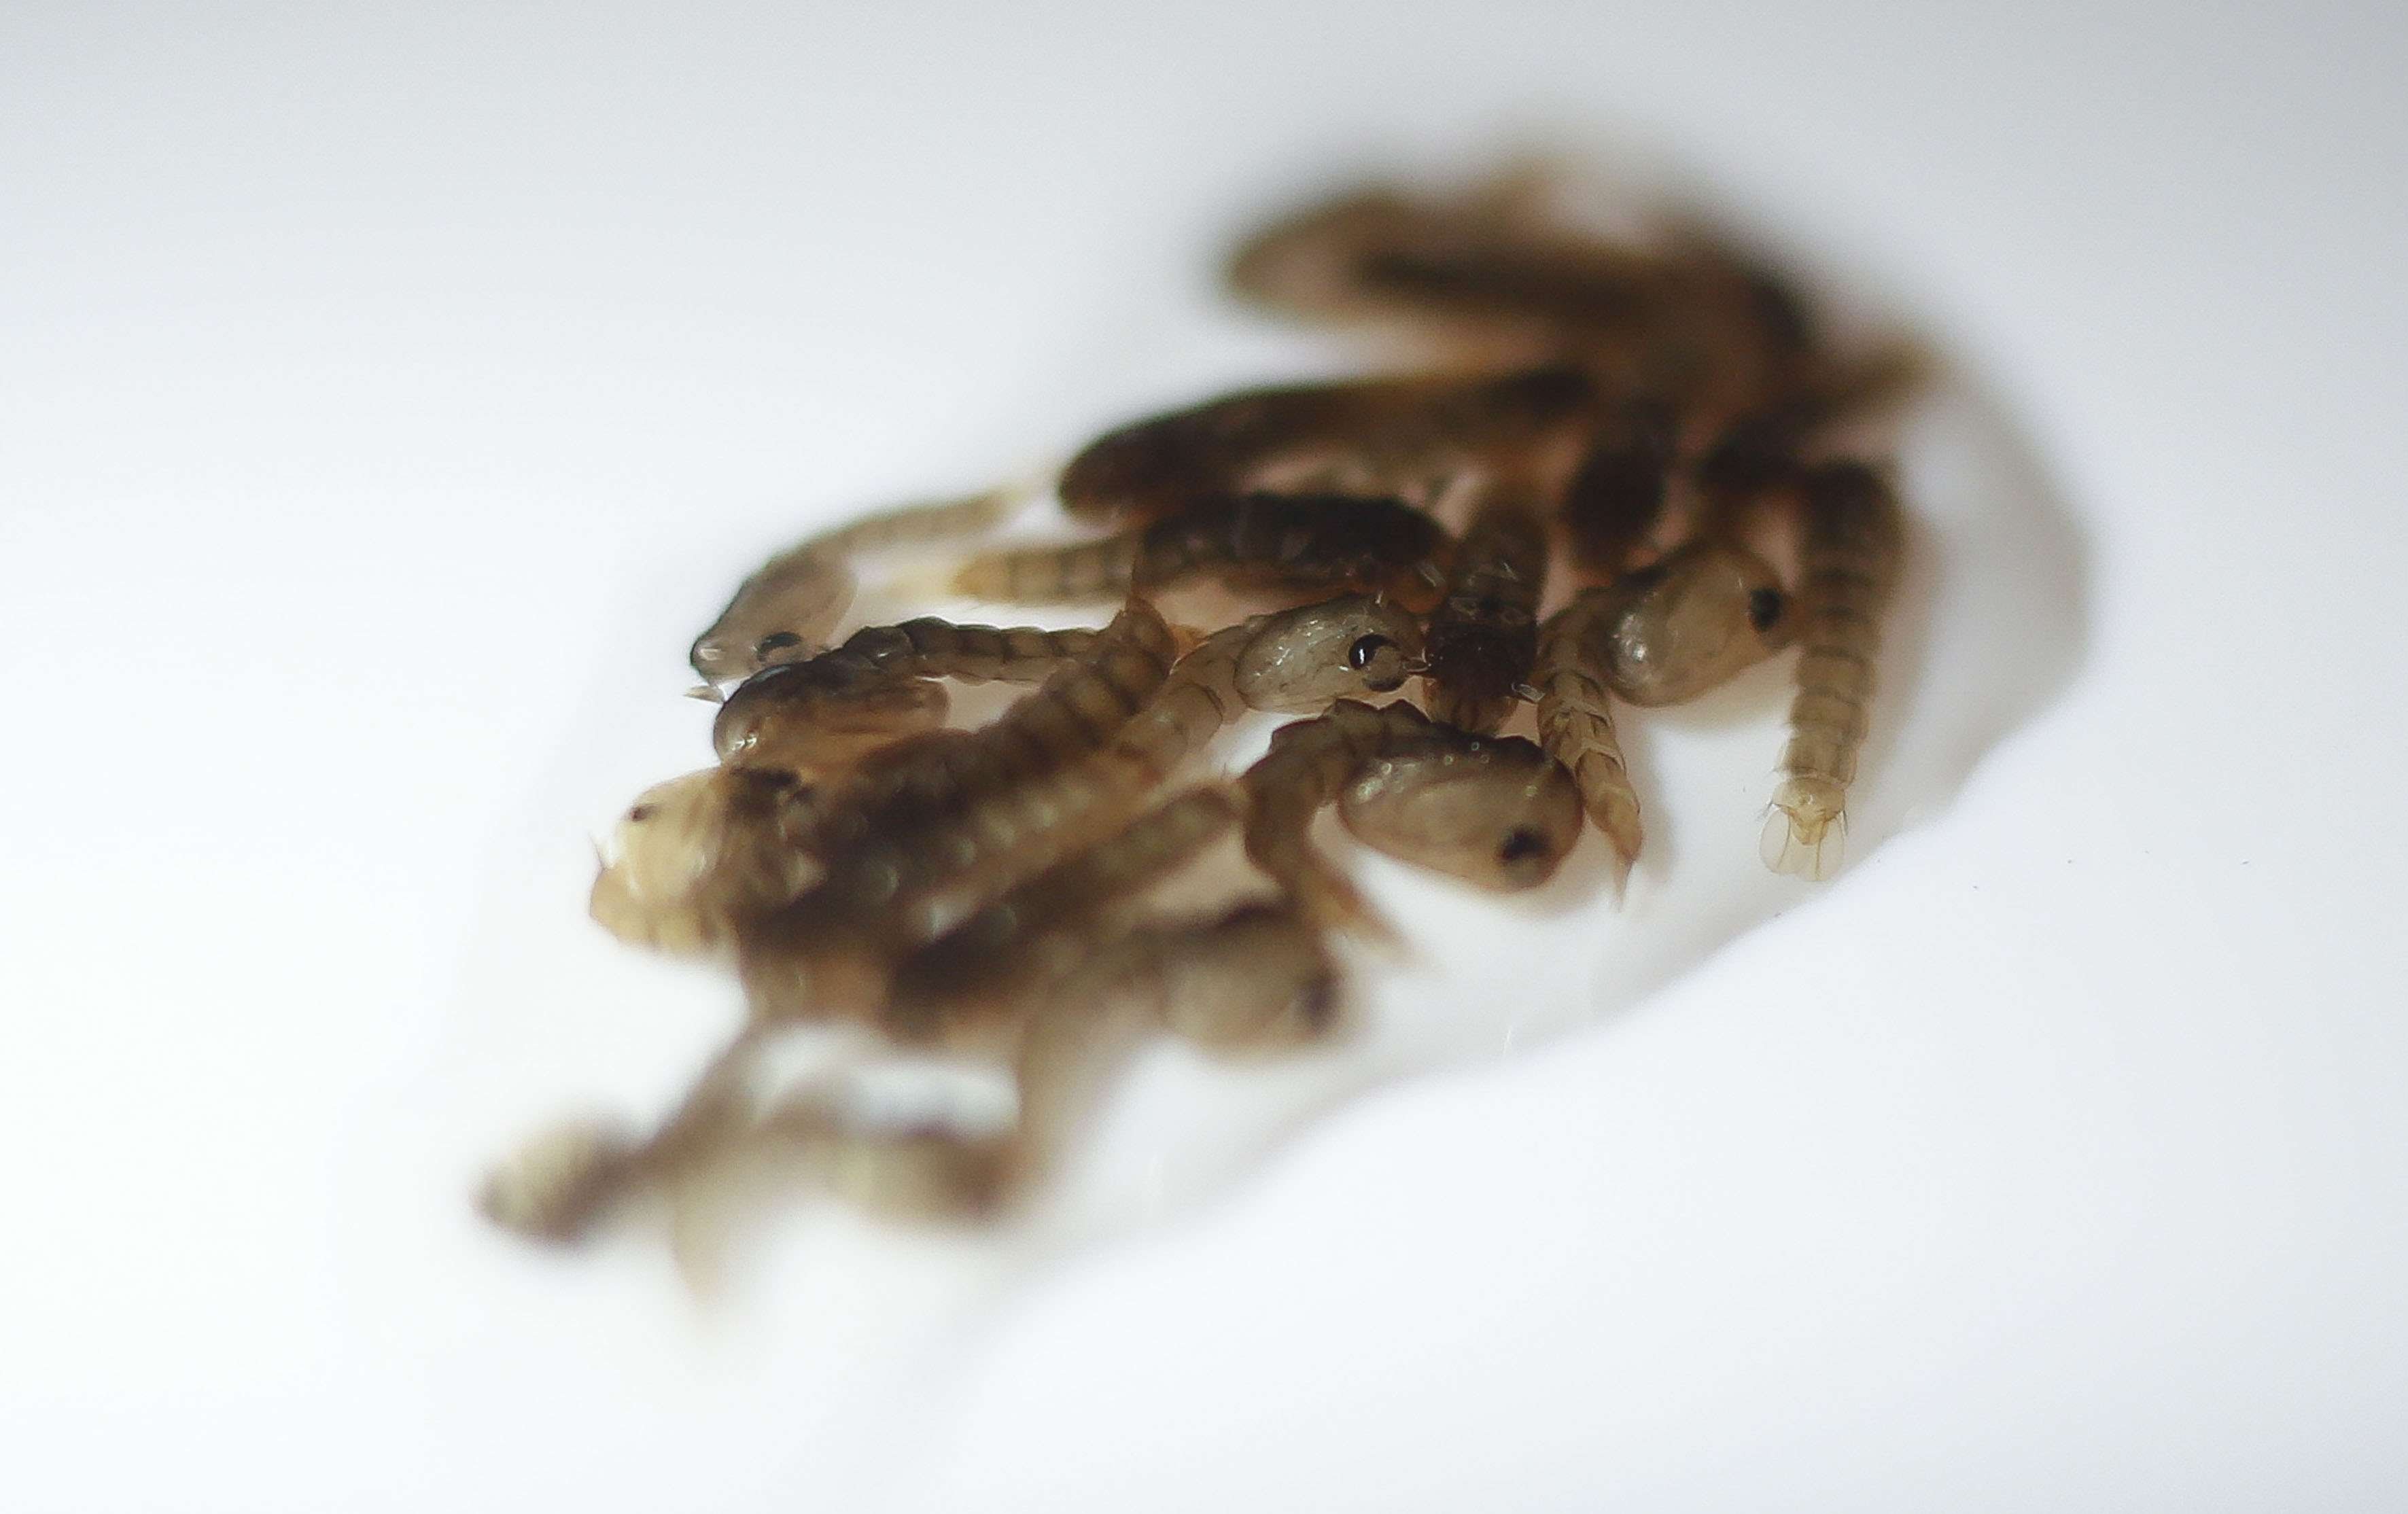 Larvae of the Aedes aegypti mosquito, infected with the Wolbachia bacteria which alters the reproductive capability of its host, are seen in a lab in Sao Paulo, Brazil, on Wednesday. Photo: AFP